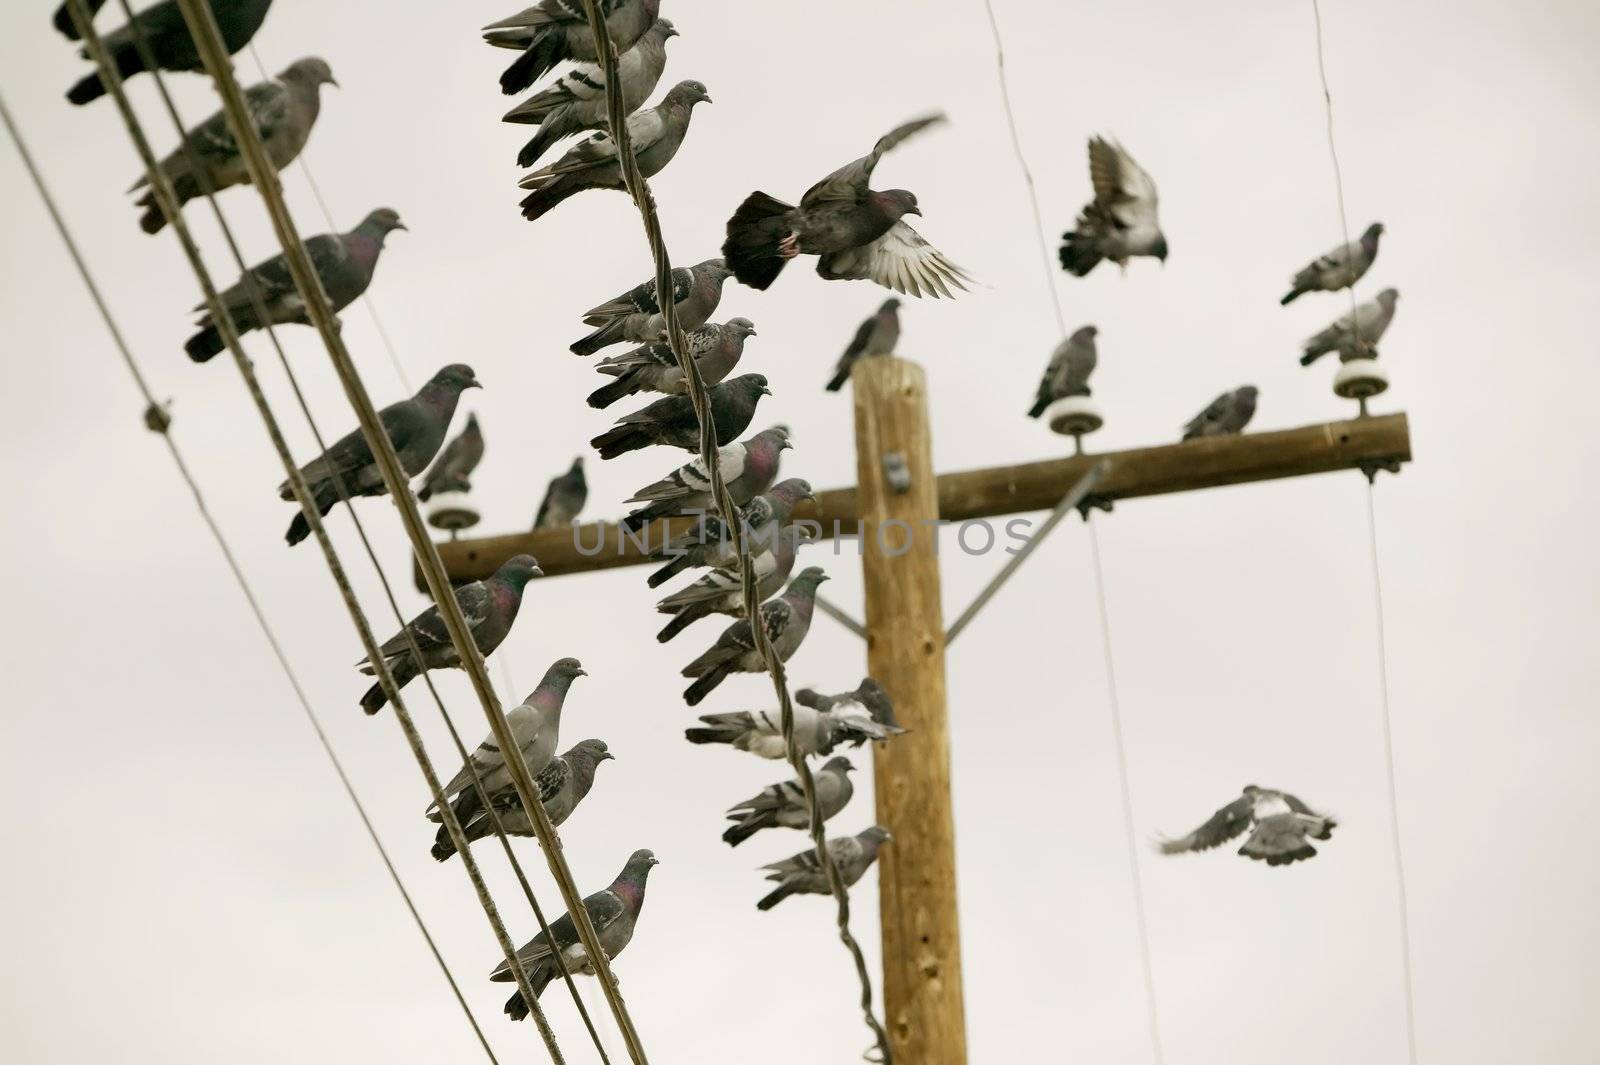 Flock of pigeons perched on a power line.